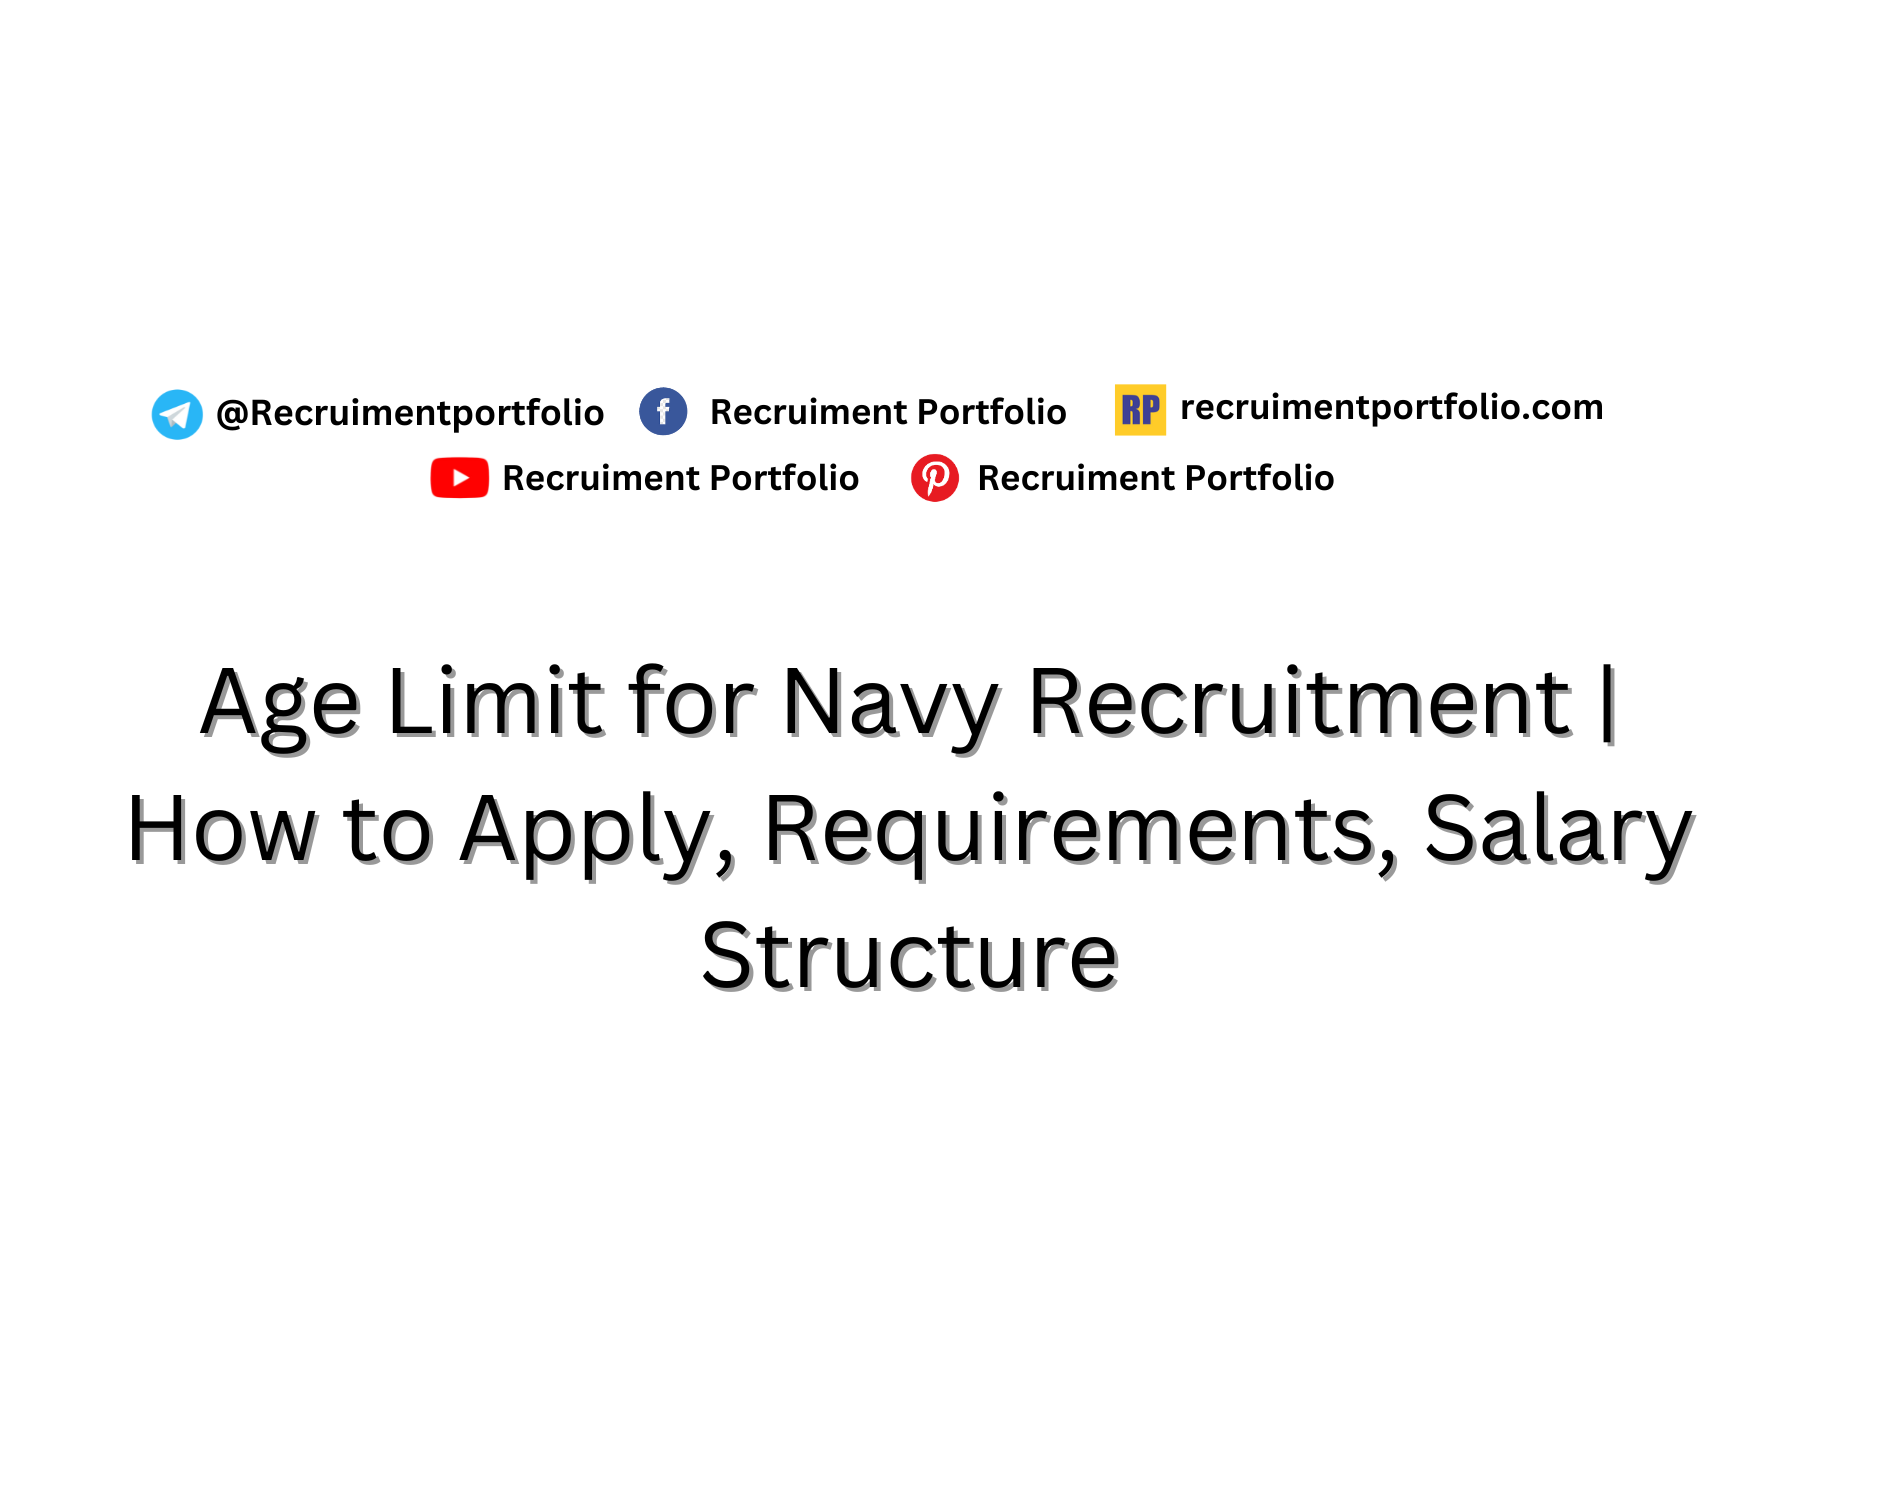 Age Limit for Navy Recruitment